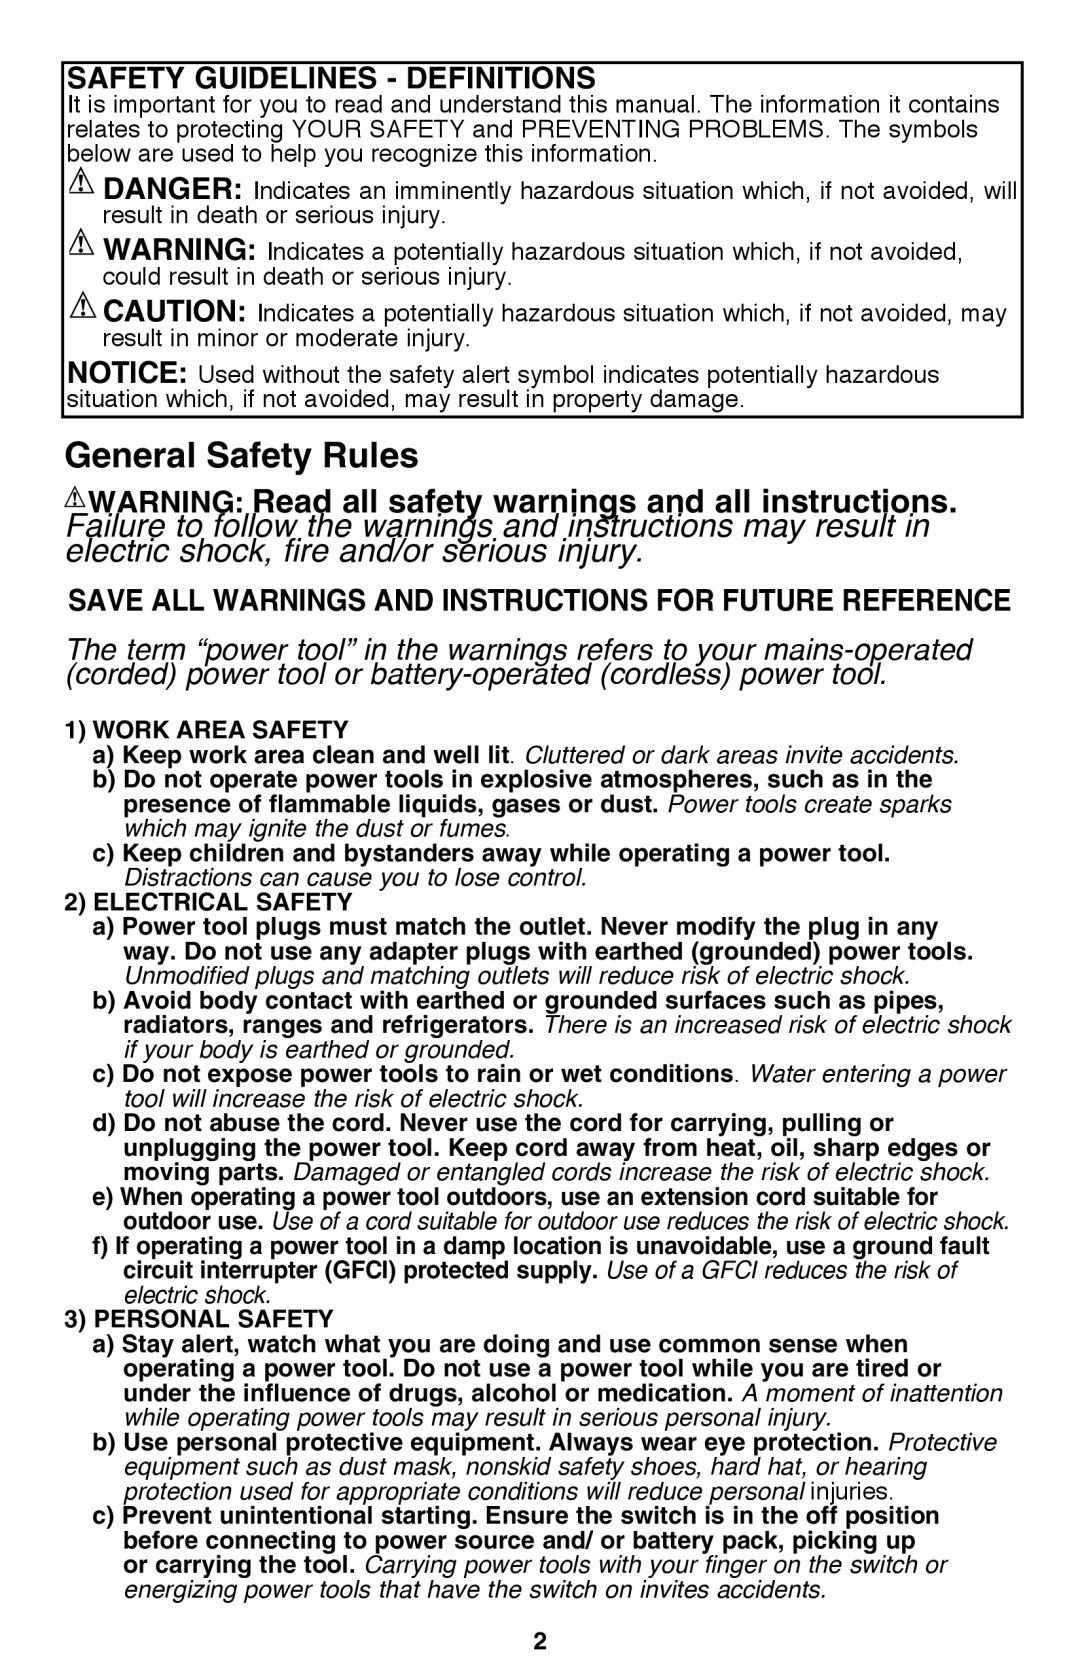 Black & Decker PF260 General Safety Rules, Safety Guidelines - Definitions, Distractions can cause you to lose control 